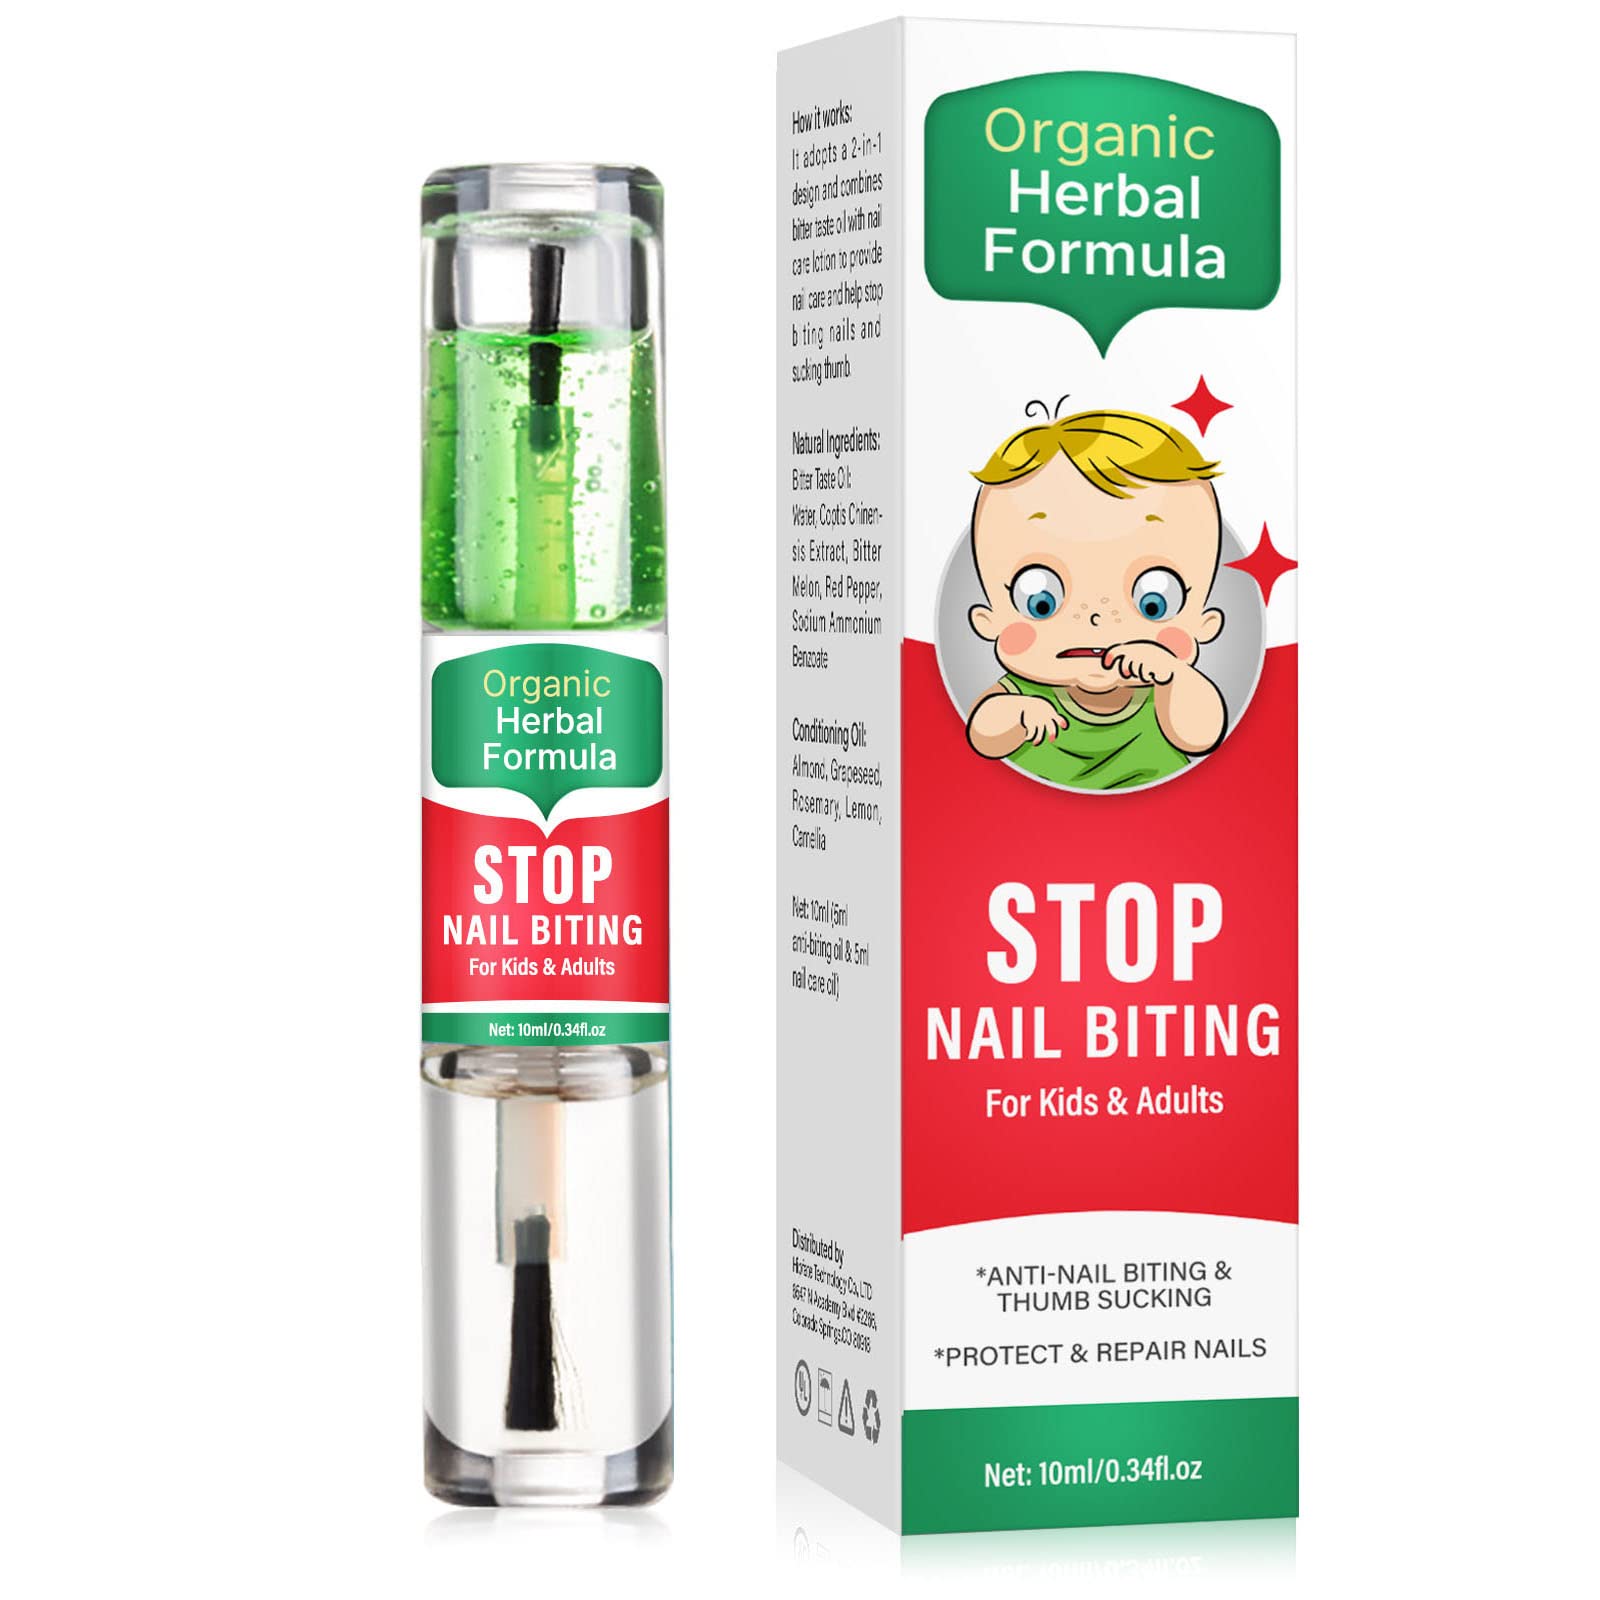 Stop Biting Nails for Kids - Anti-Nail Biting Polish,15ml Nail Bitter &  Thumb Sucking Deterrents, Finger Sucking Stop, Anti Thumb Sucking, Nail  Biting Prevention for Kids & Adults : Amazon.co.uk: Baby Products